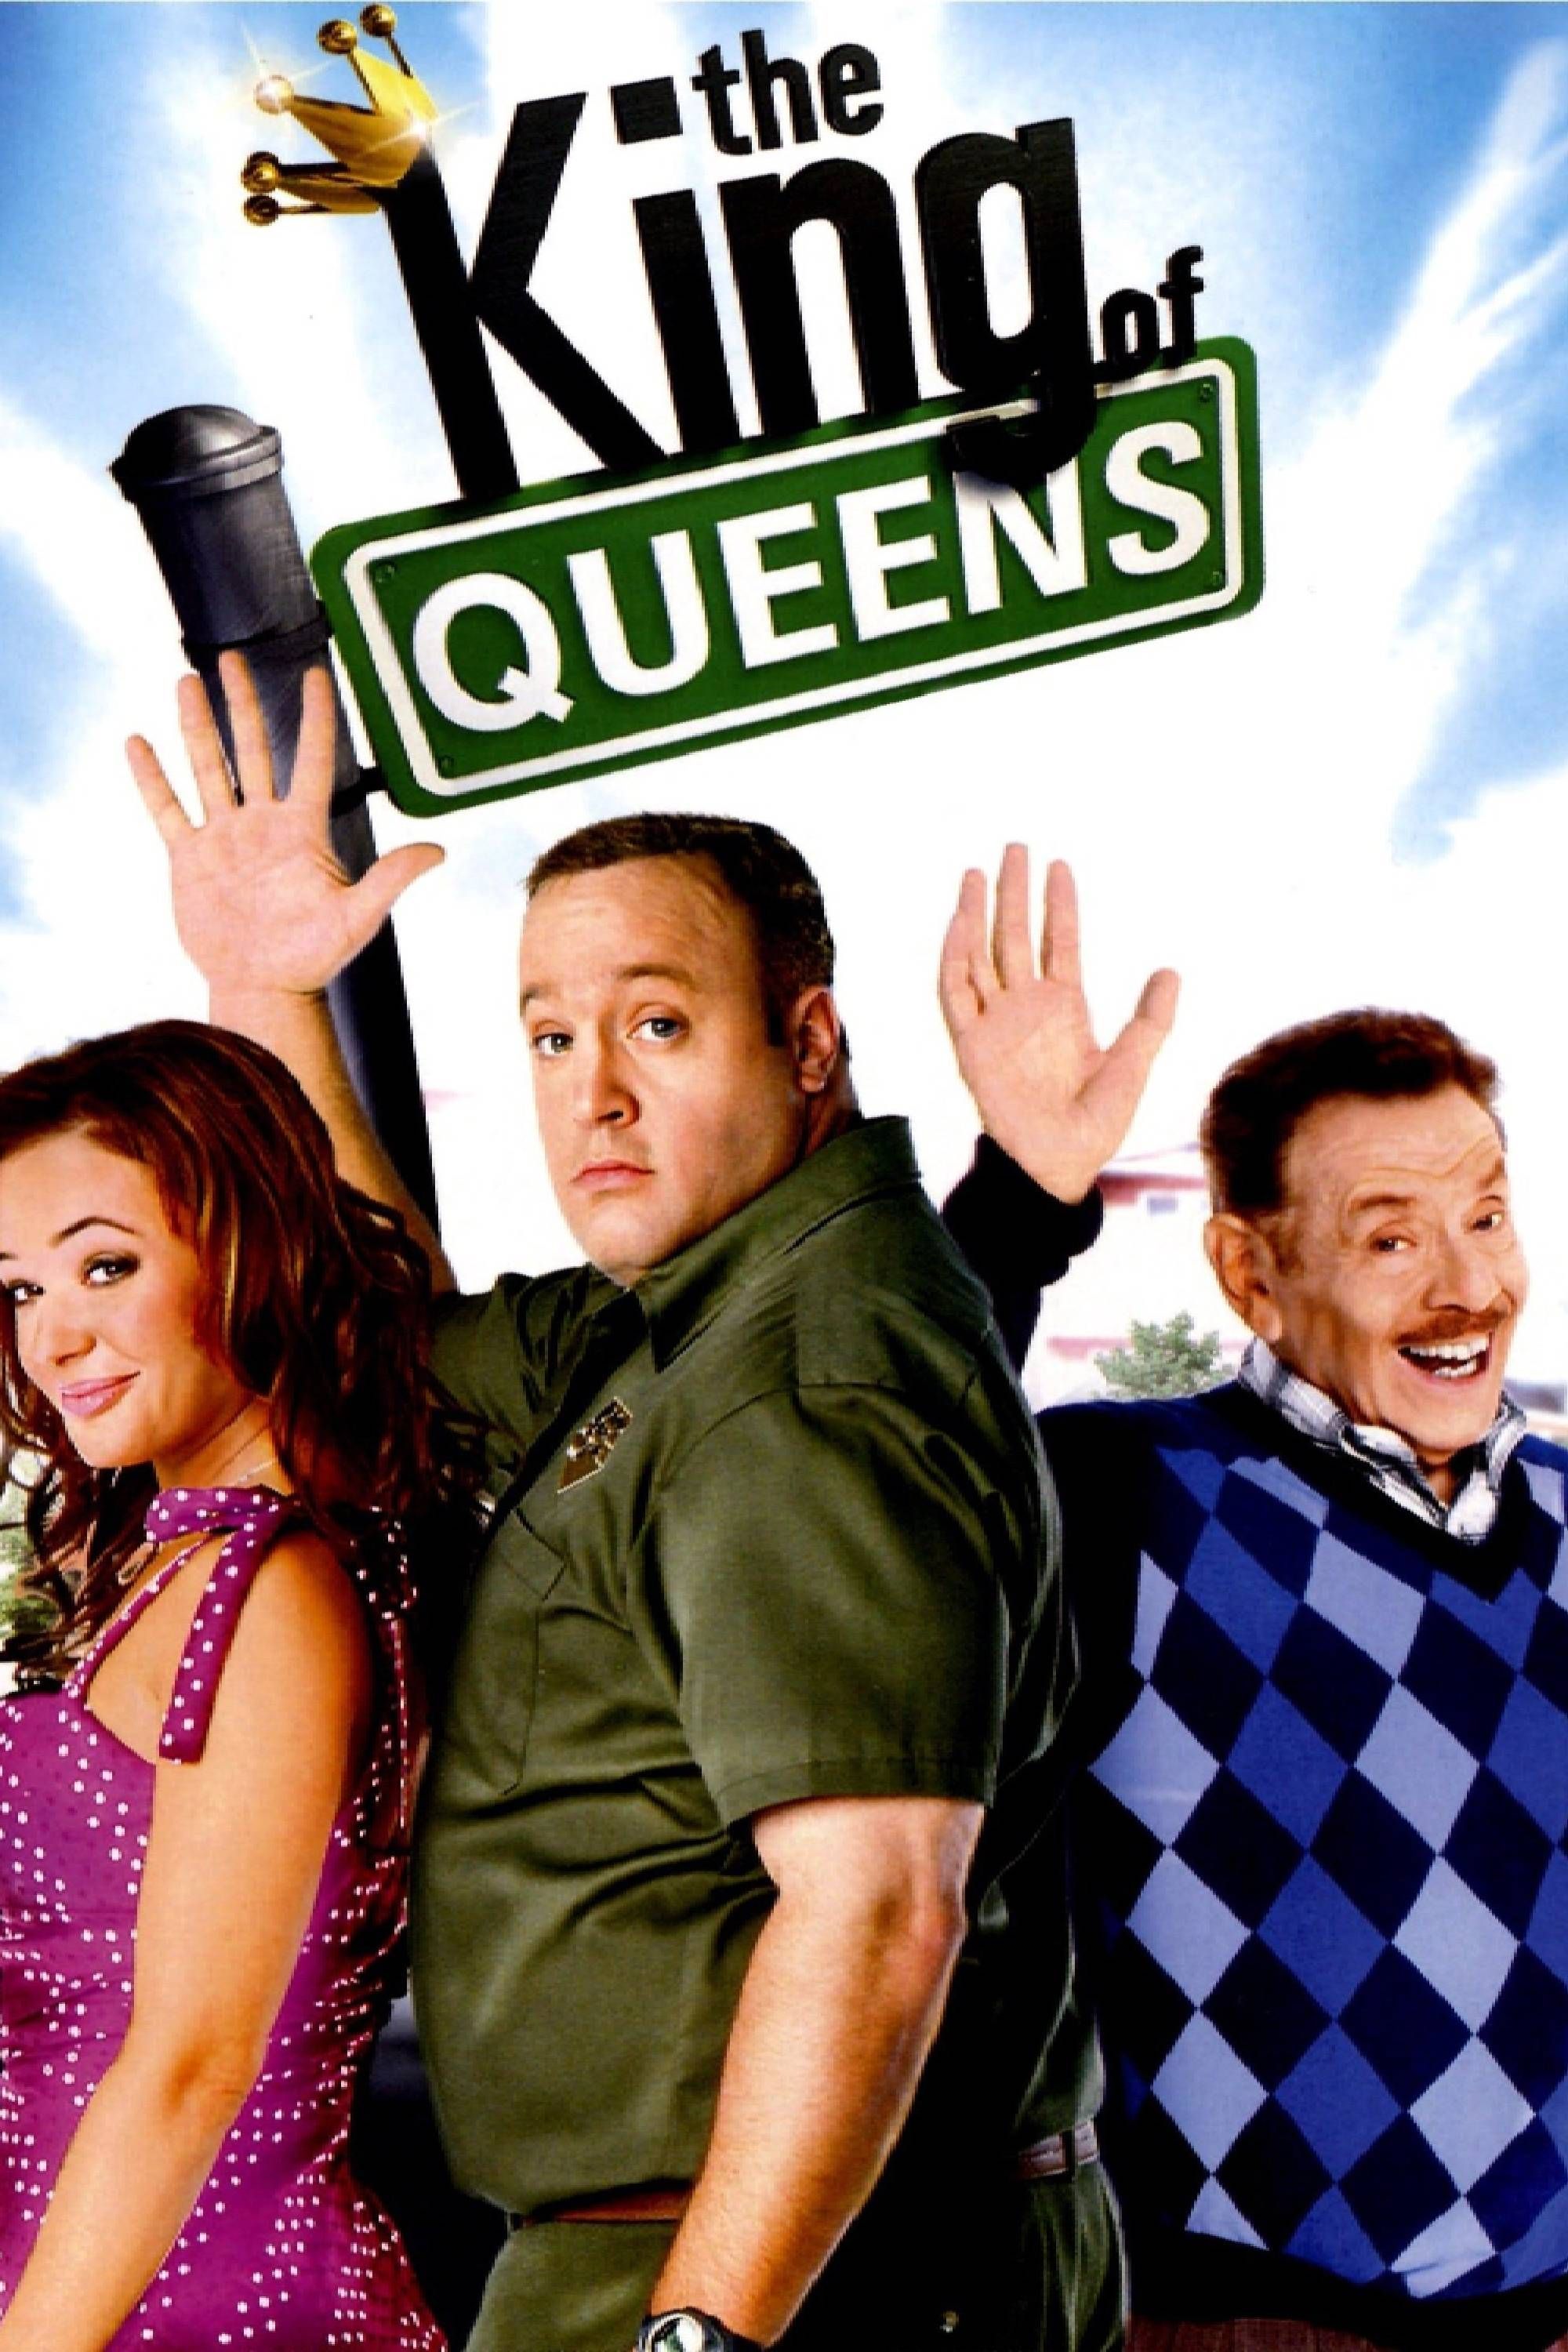 What happened to The Kings of Queens cast?